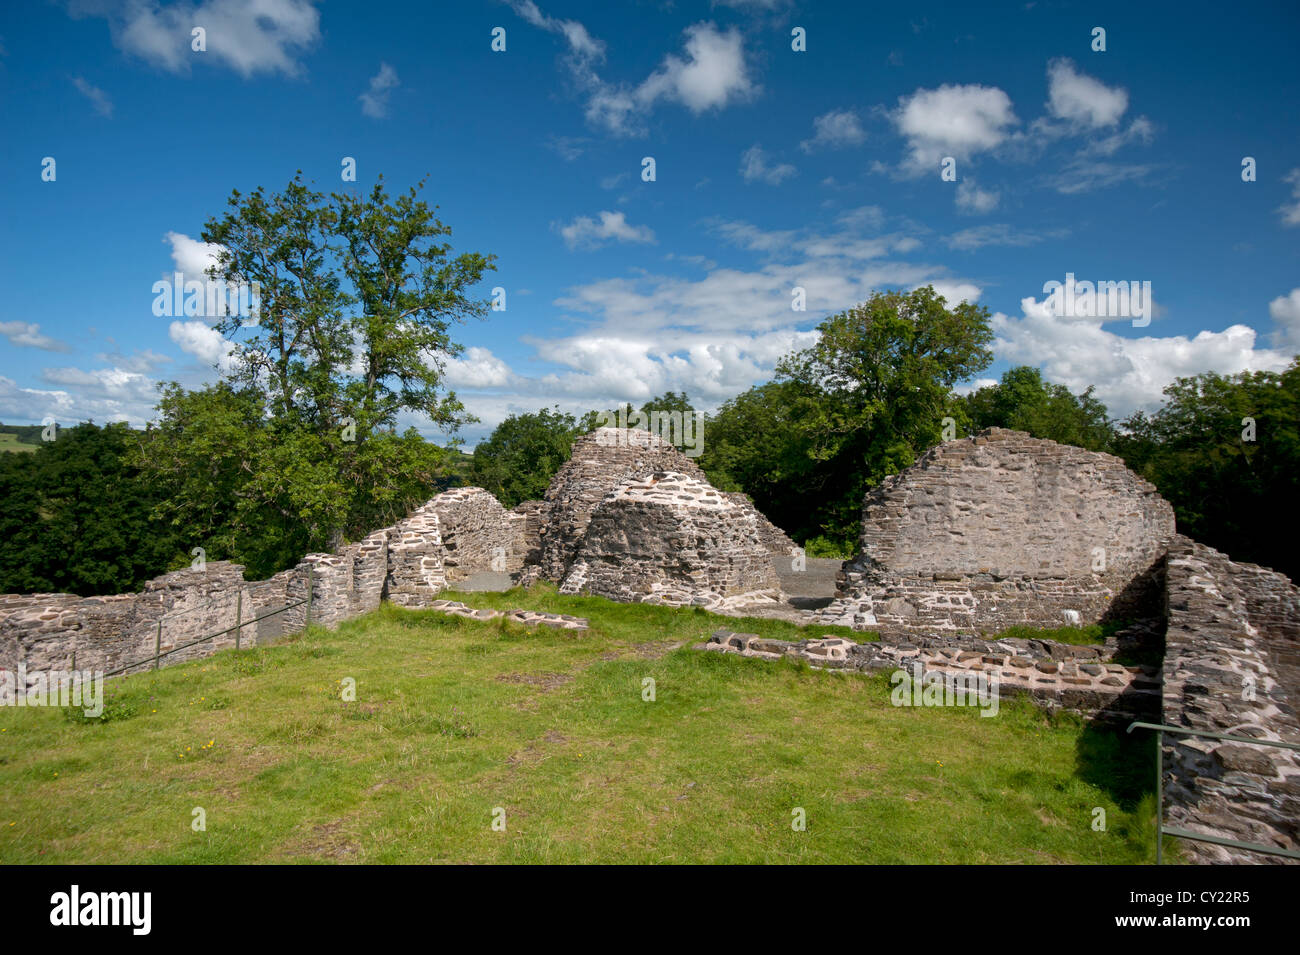 Dolforwyn Castle, recently excavated ruins in Powys, Montgomeryshire. Mid Wales   SCO 8713 Stock Photo